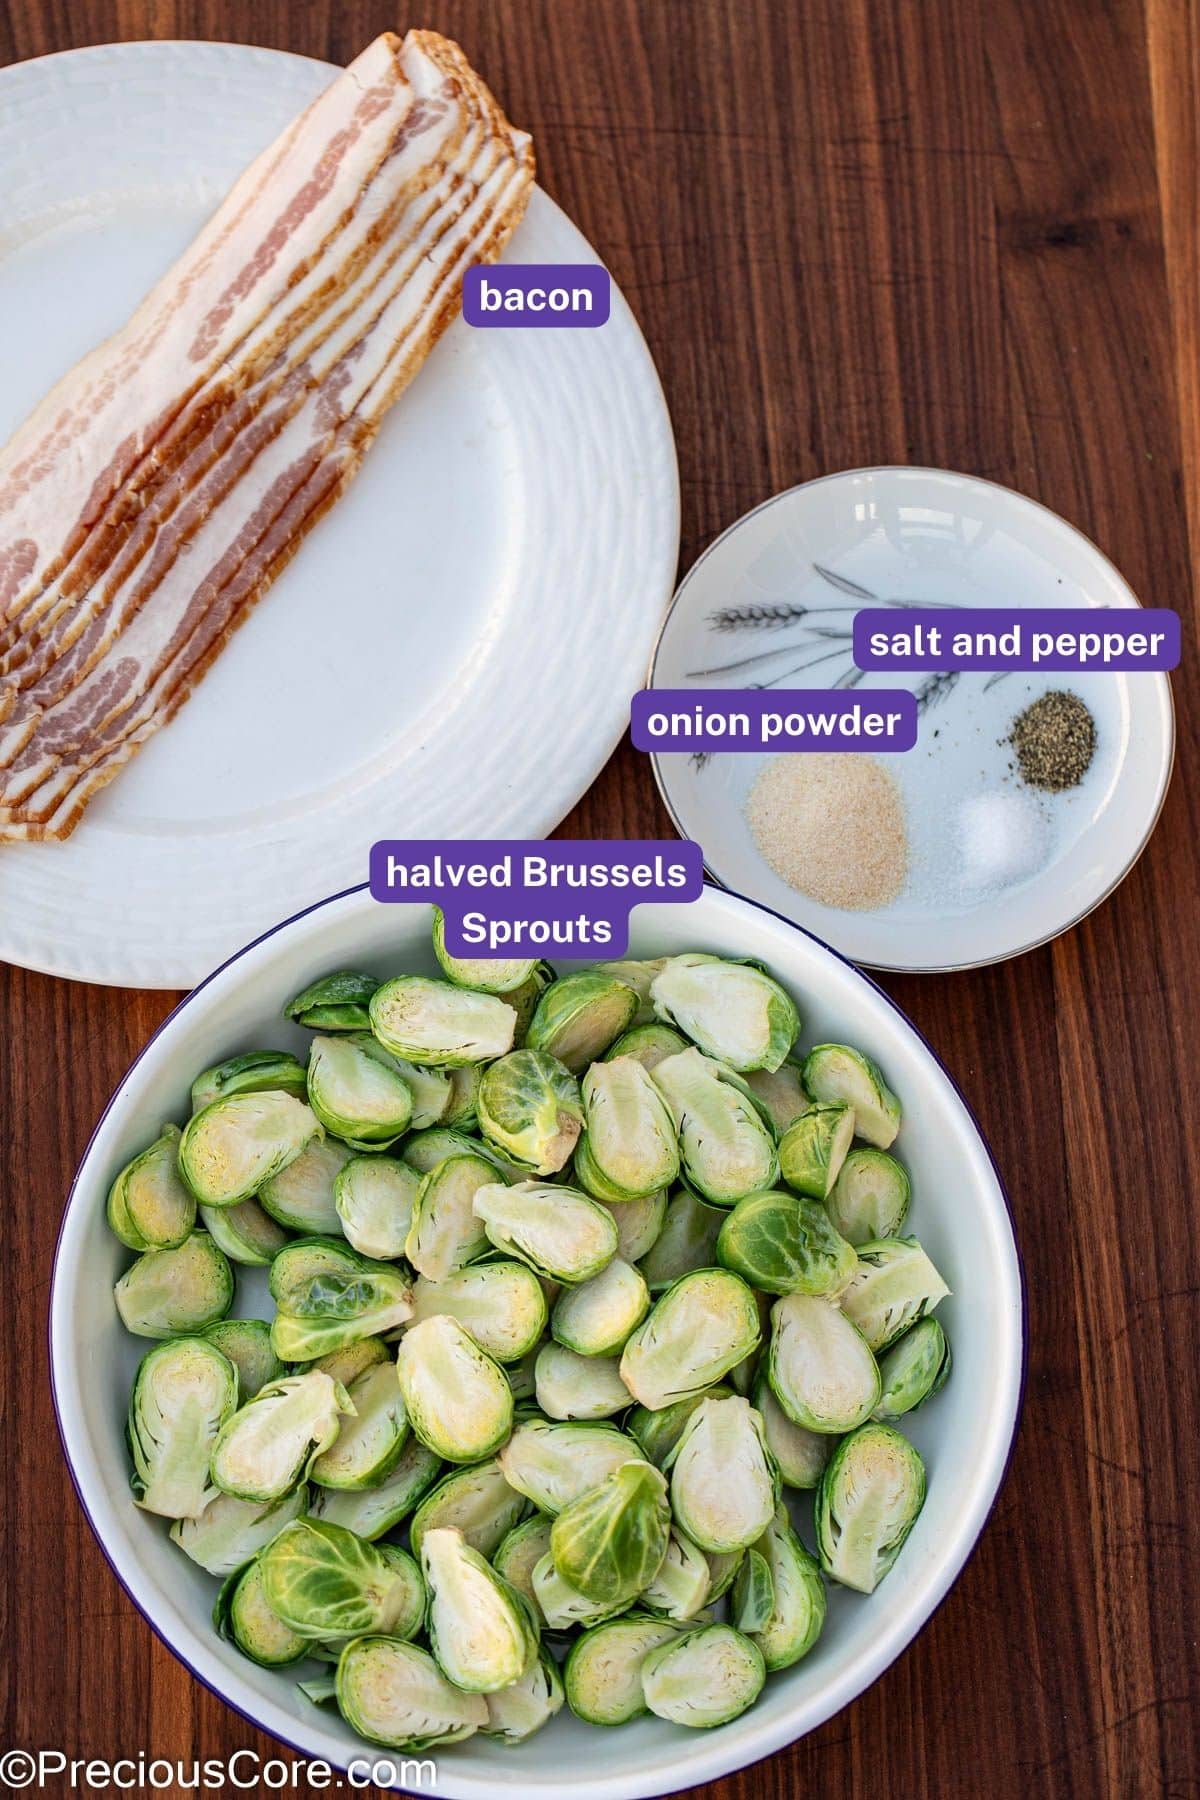 Ingredients for pan-fried Brussels sprouts with bacon with labels.